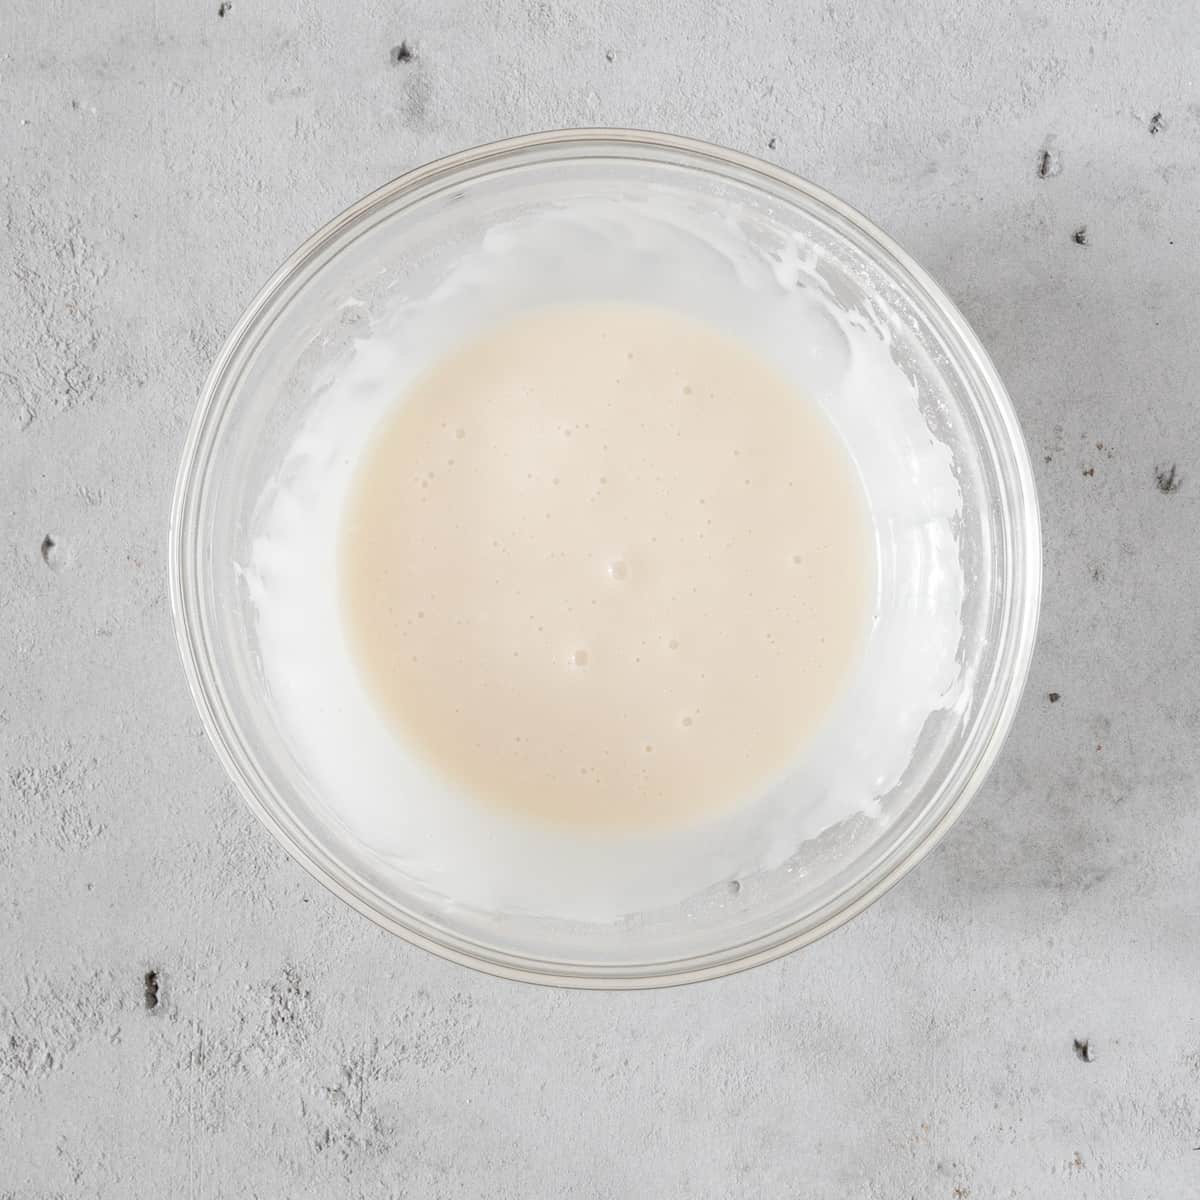 the vanilla glaze in a glass bowl on a grey background.